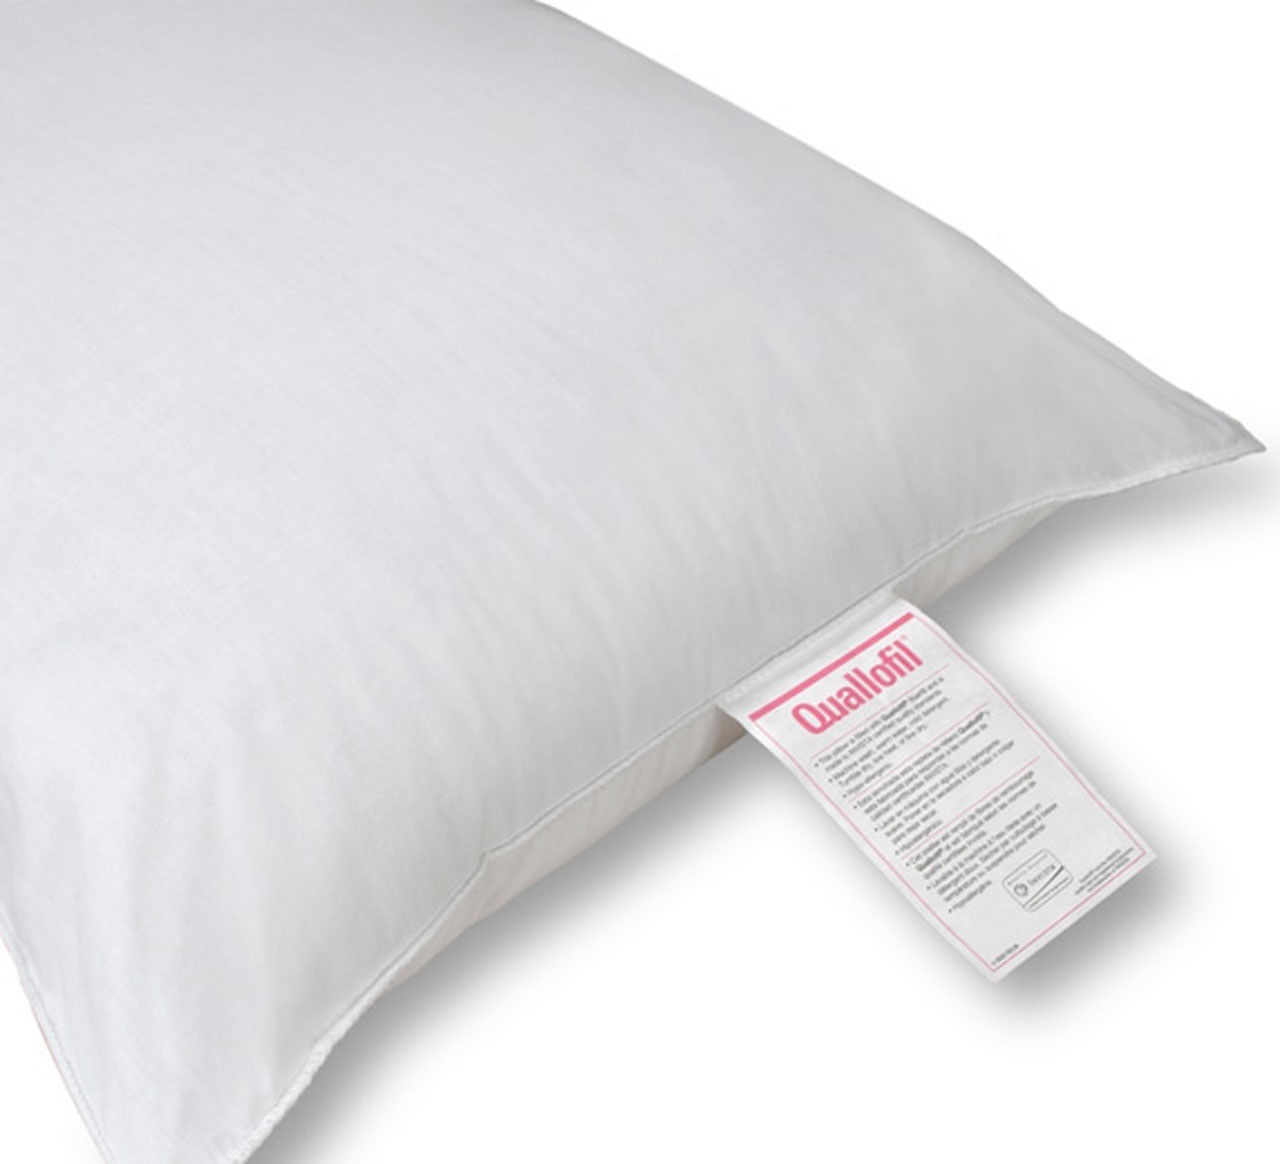 In which country is the quallofil pillow, also known as the Qualofill II® Pillow, manufactured?